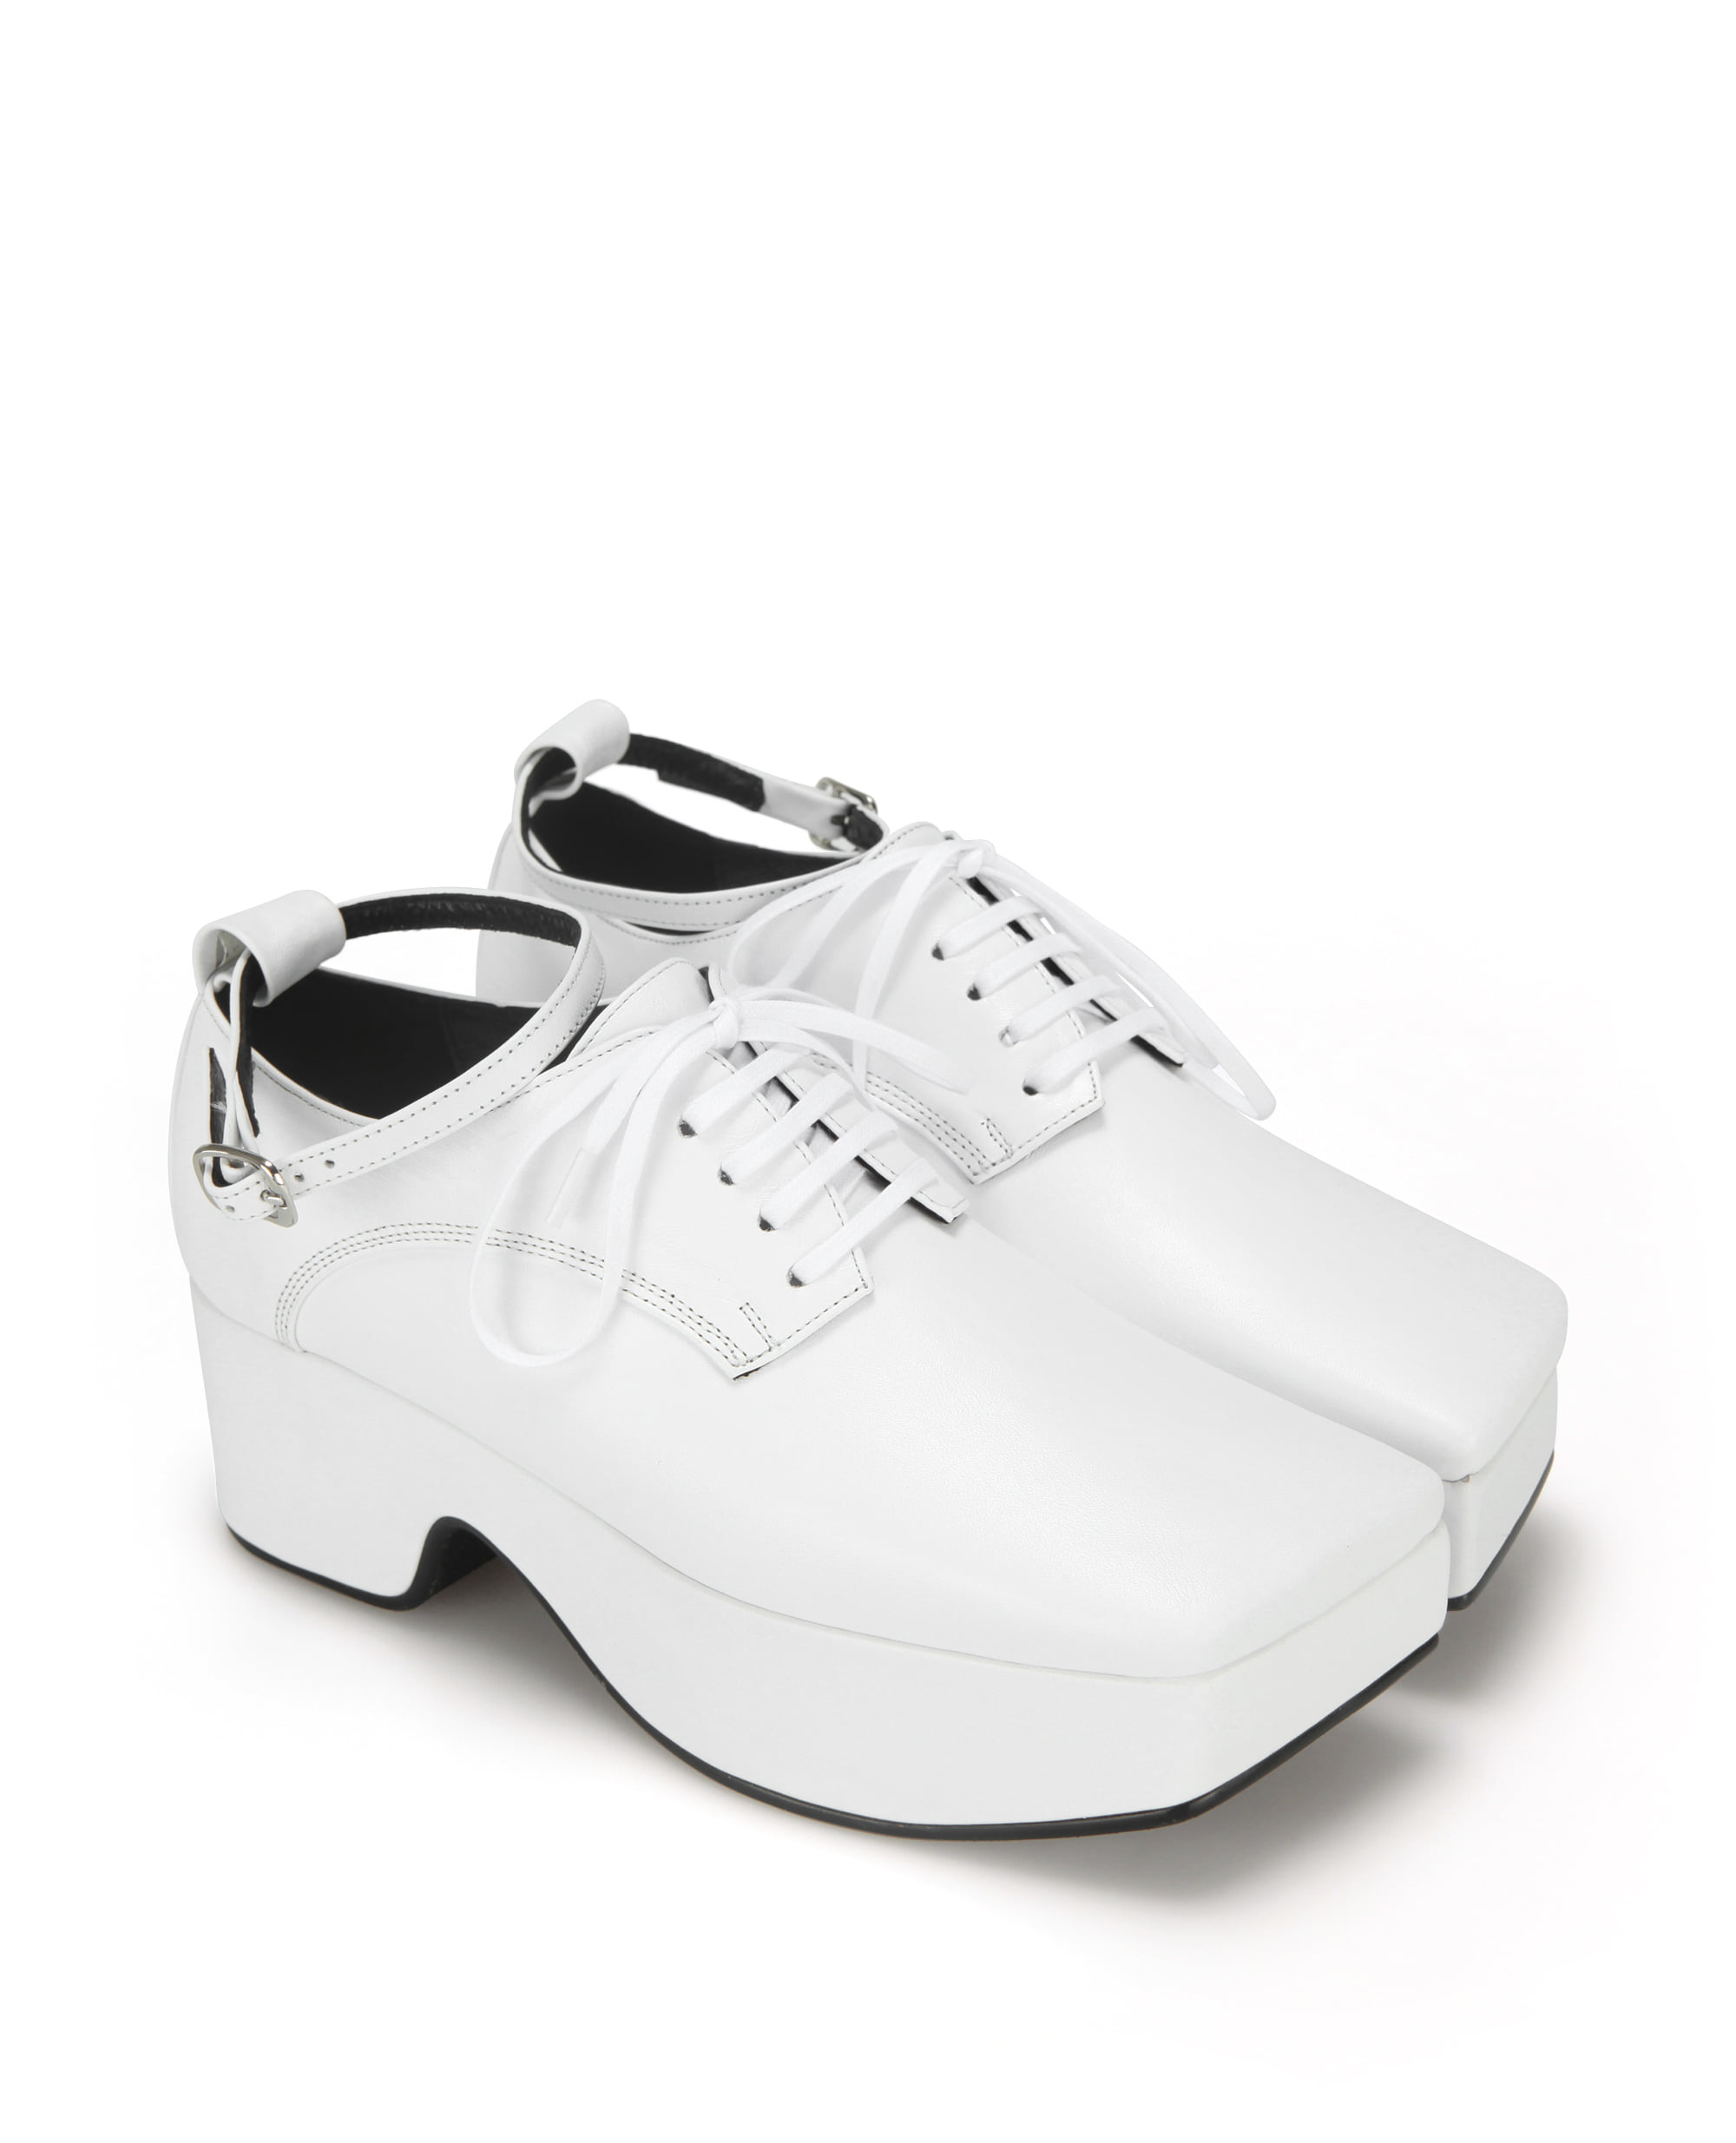 Squared toe derby platforms (+ball chain) | white